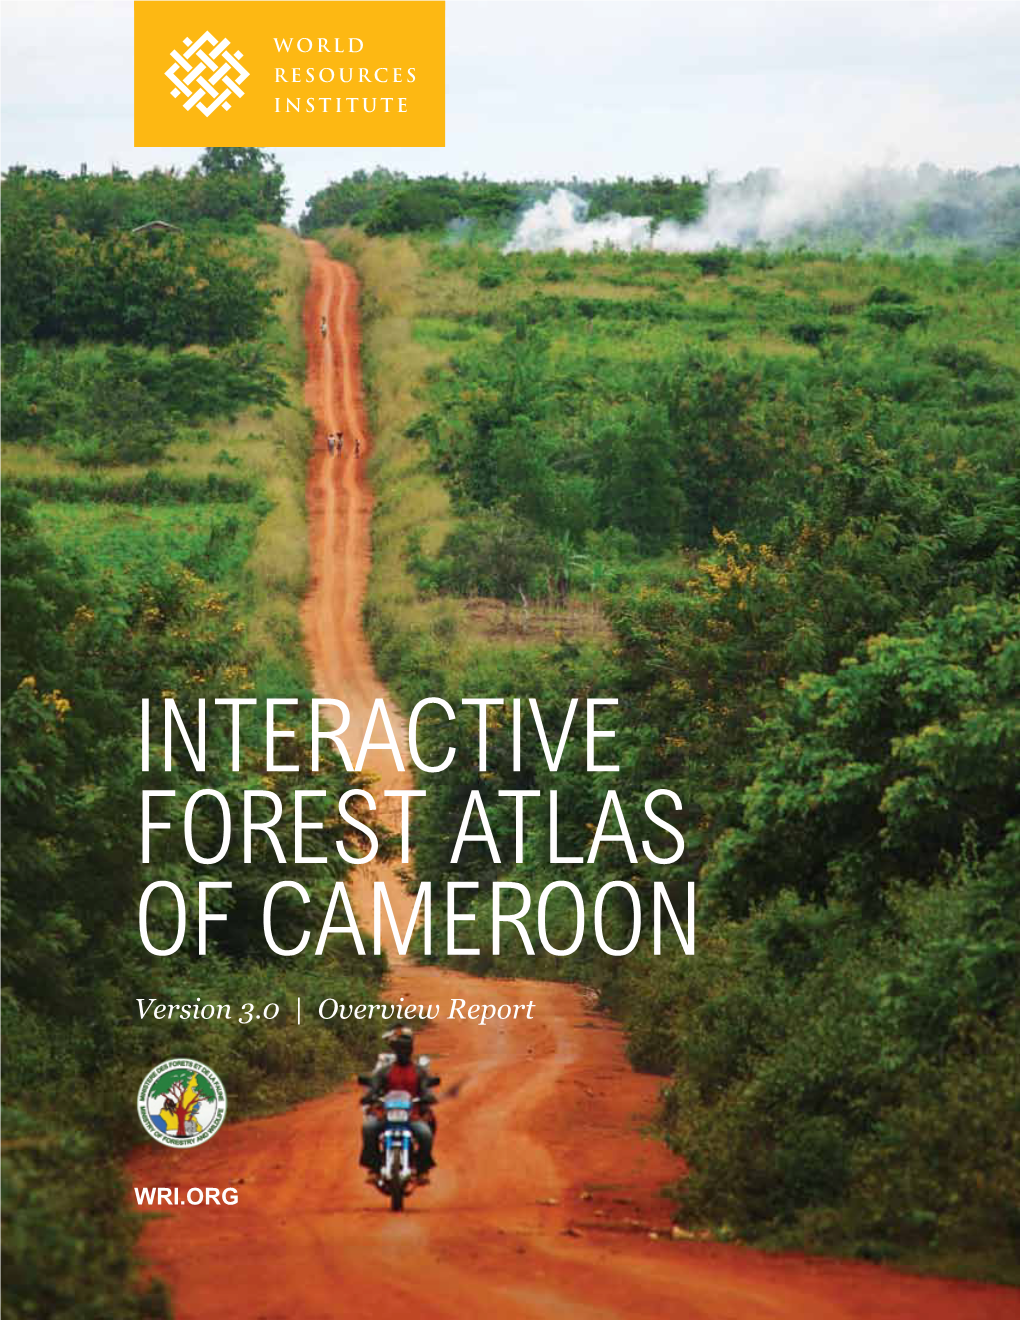 INTERACTIVE FOREST ATLAS of CAMEROON Version 3.0 | Overview Report